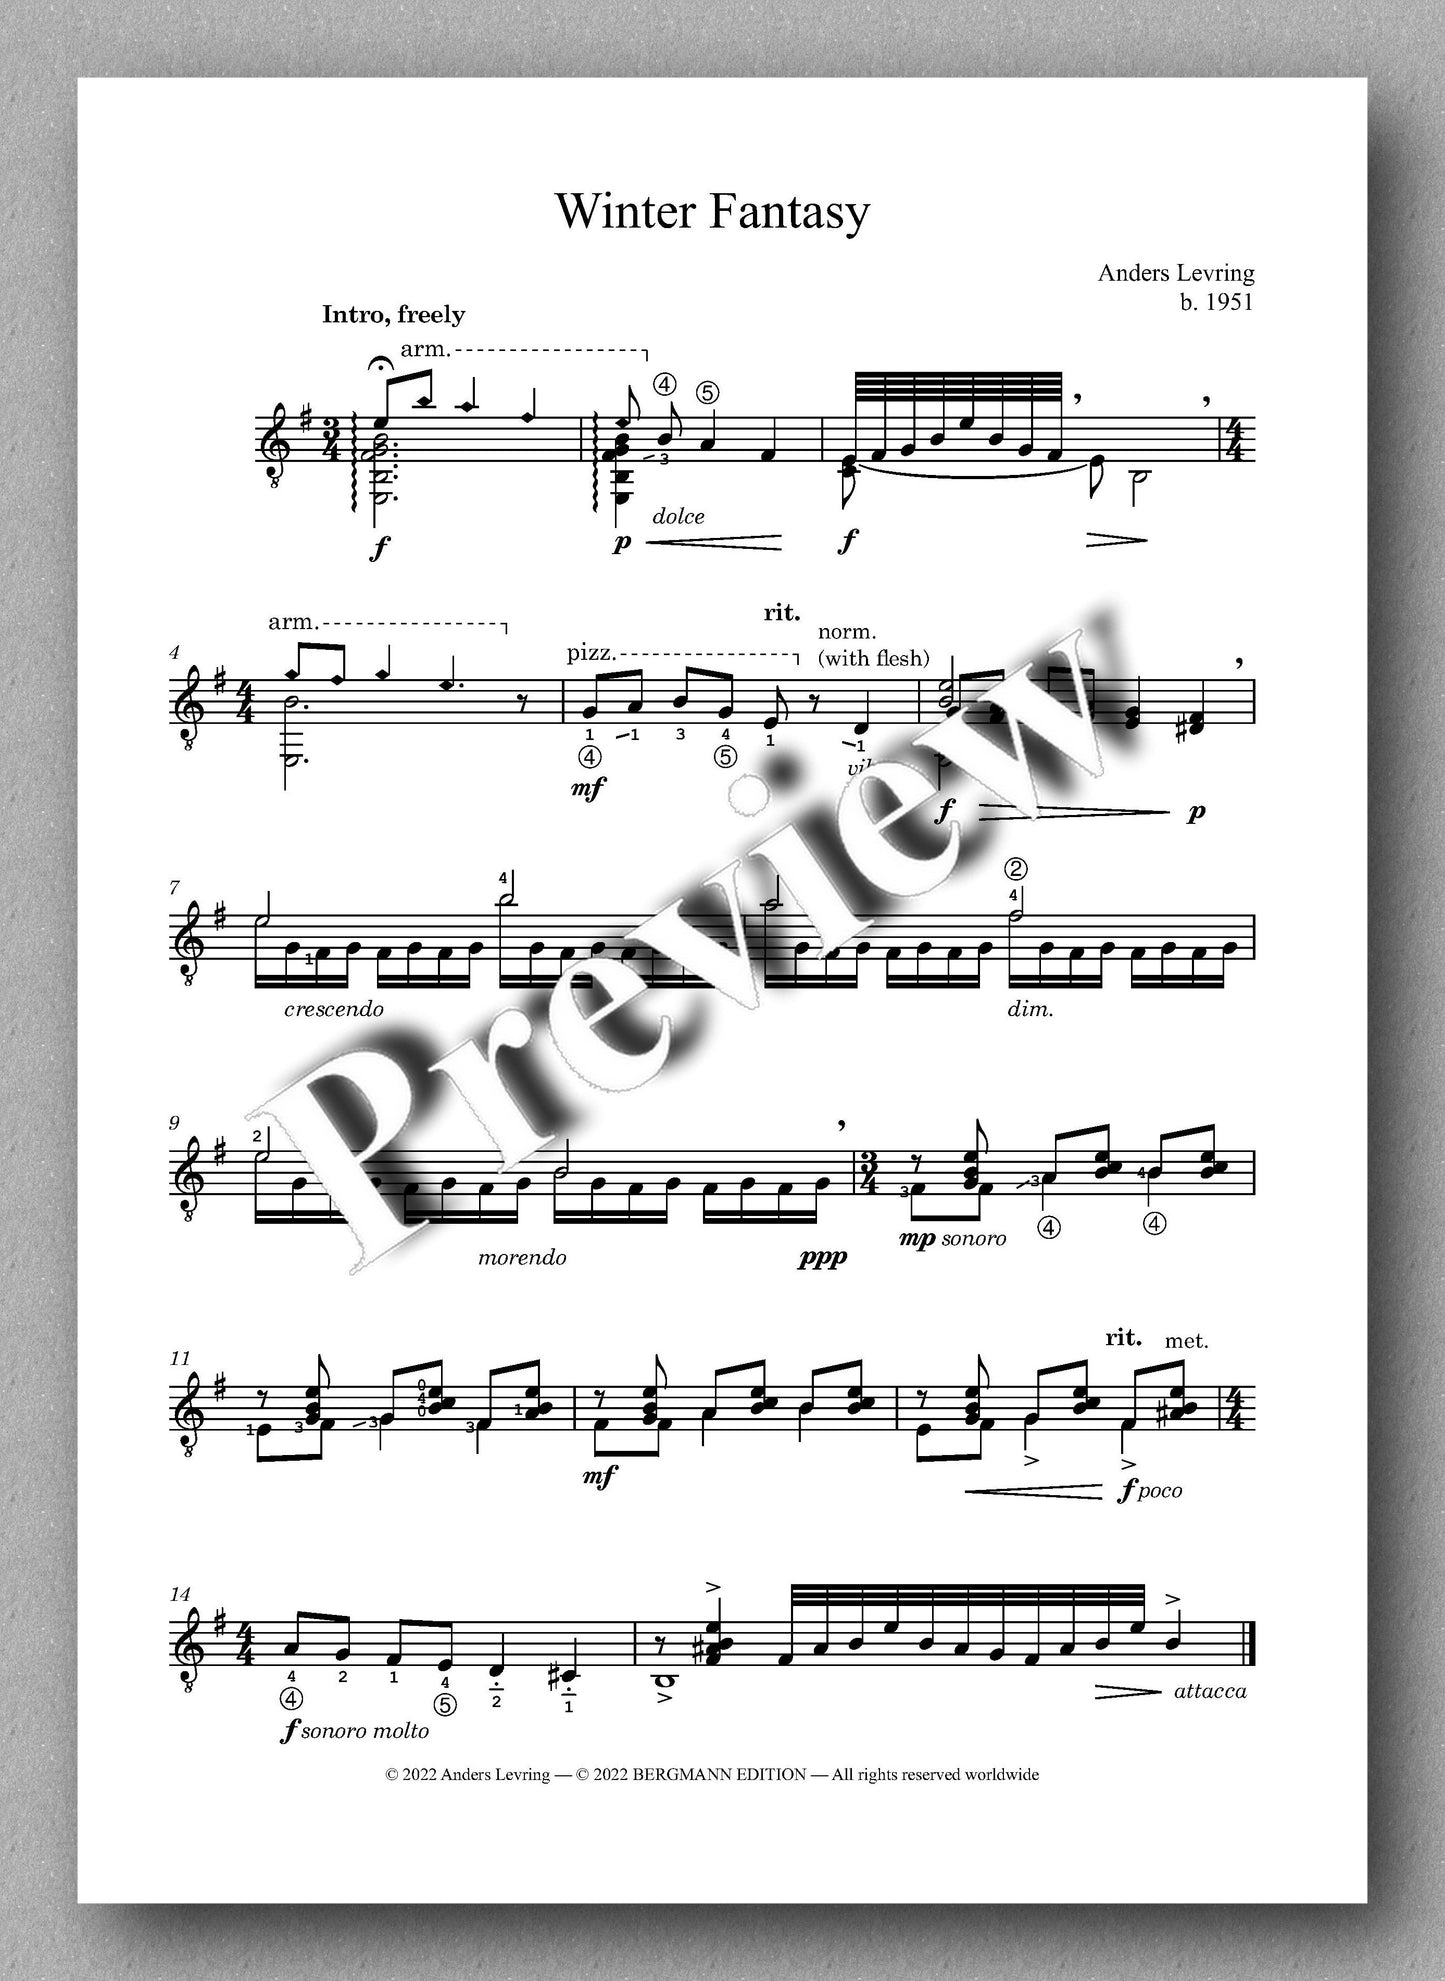 Winter Fantasy, by Anders Levring - music score 1